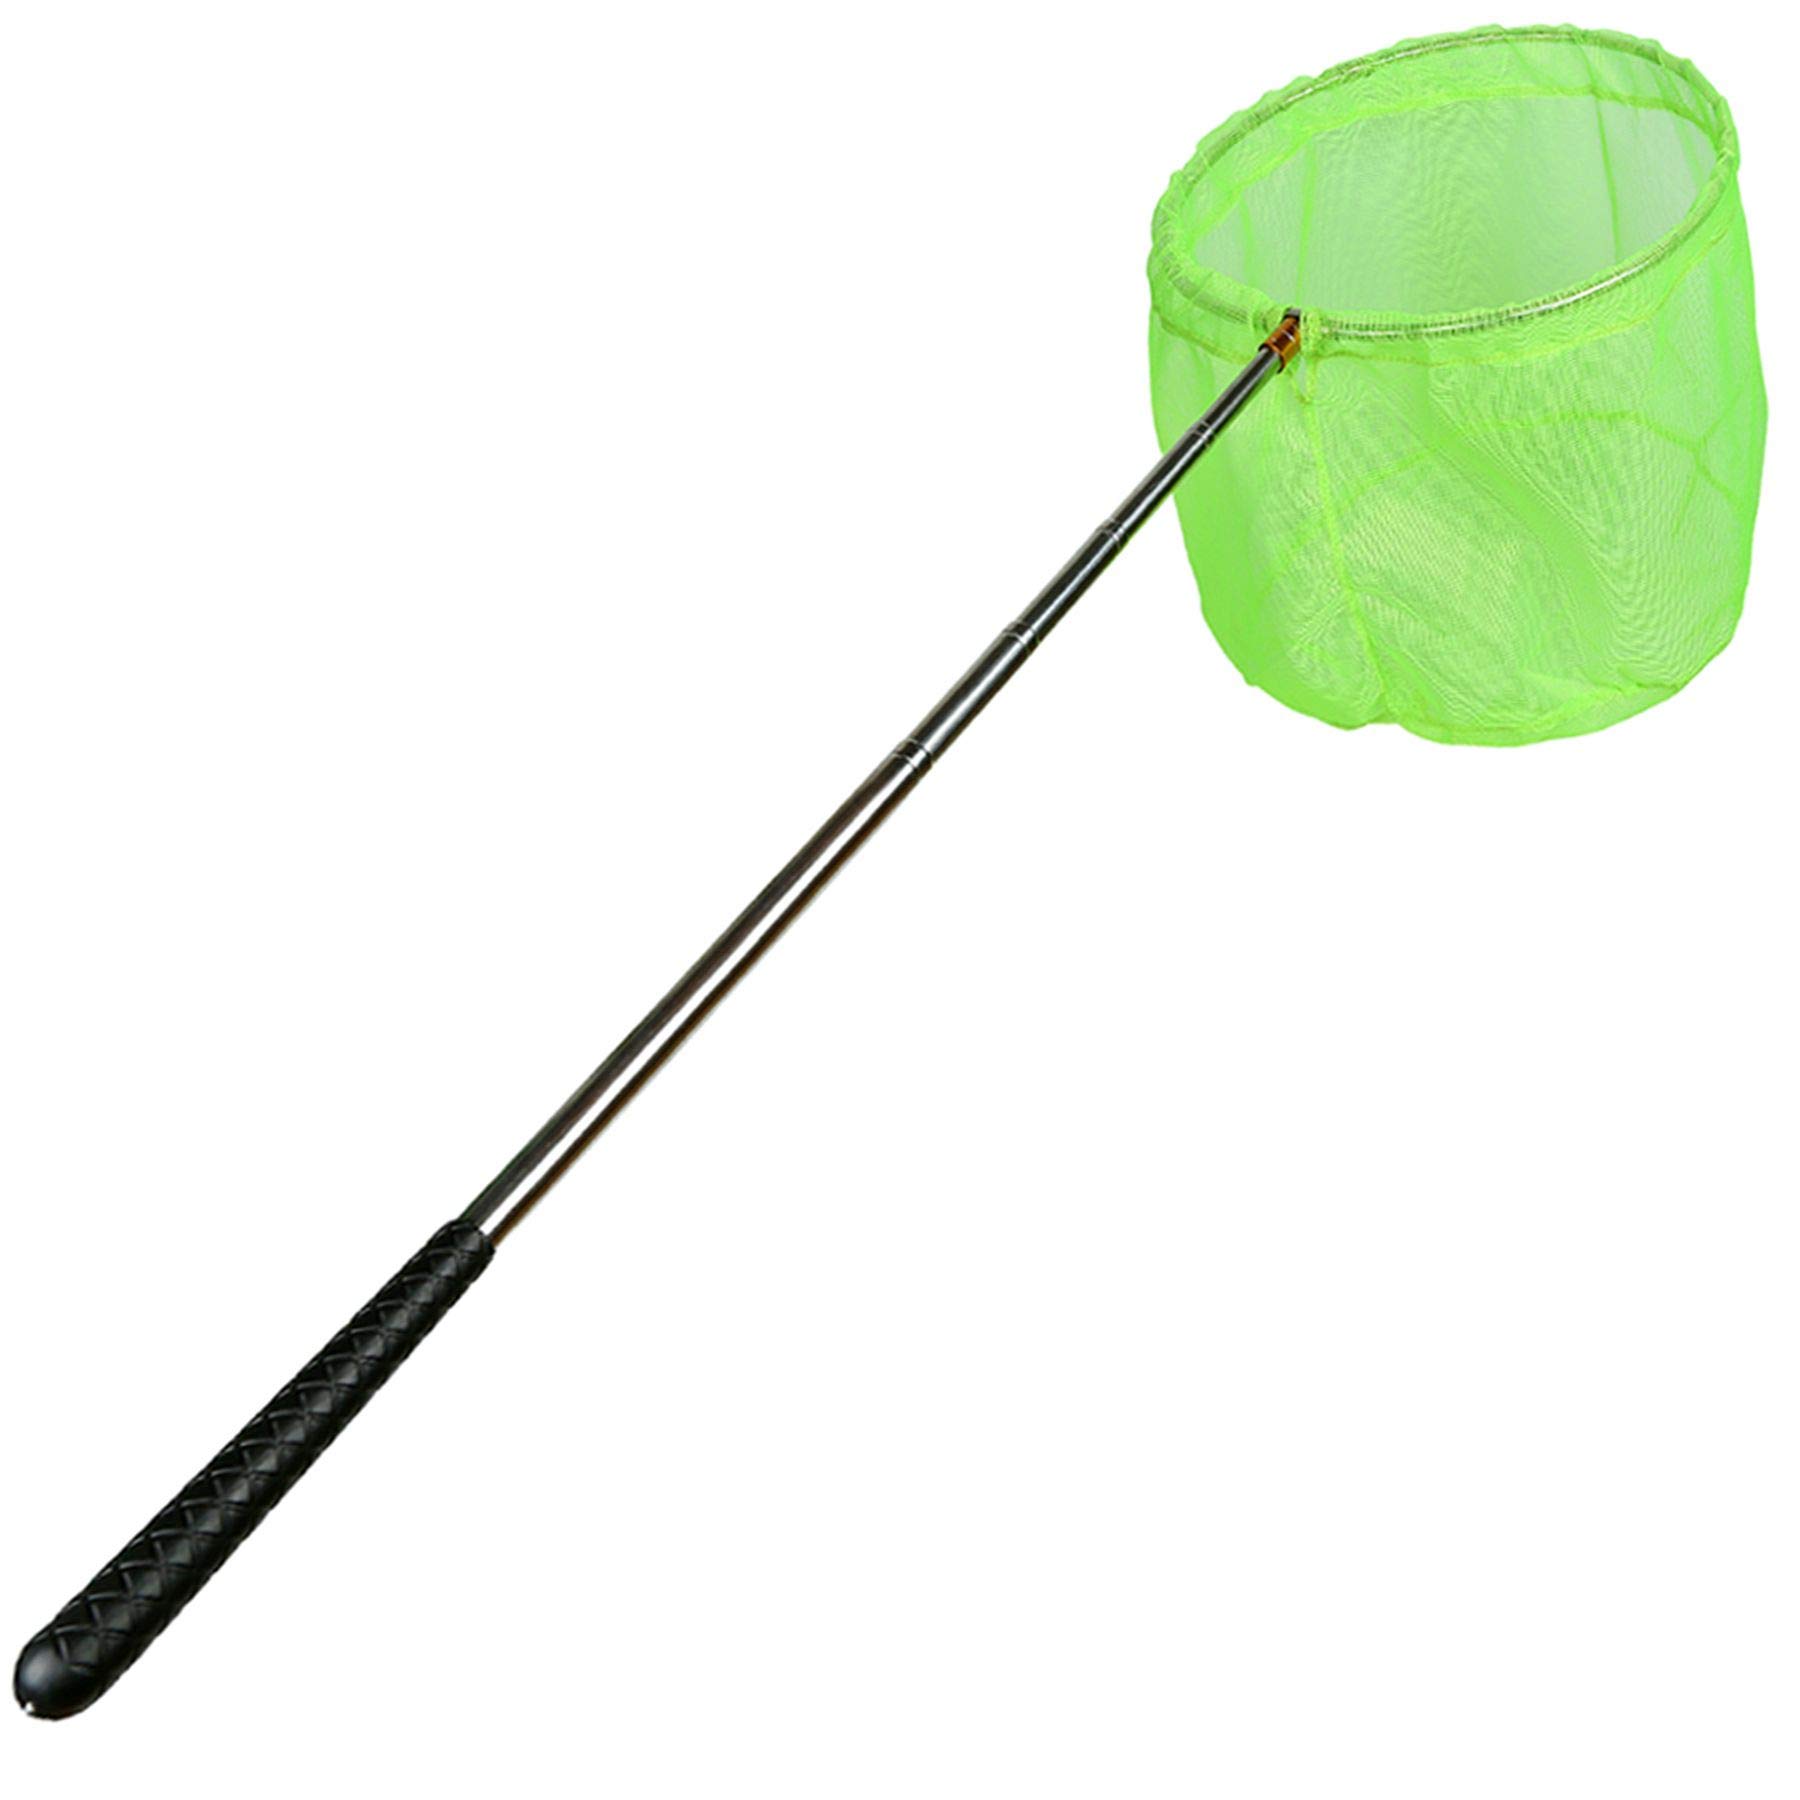 RESTCLOUD Bait Net and Fishing Landing Net with Telescoping Pole Handle  Extends to 59 inches Green